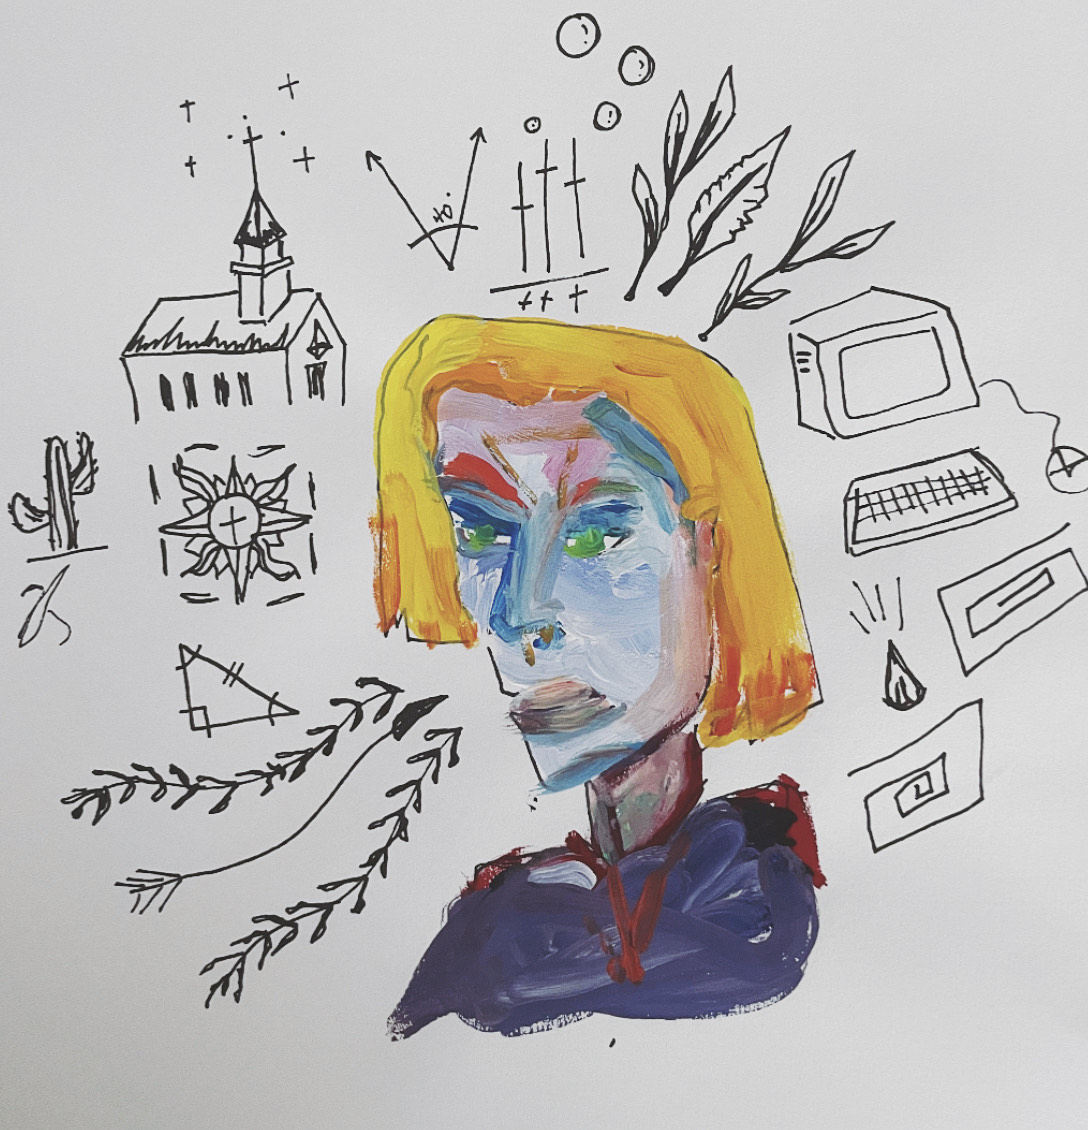 pen and paint drawing depicting a woman with yellow blond hair surrounded by a church, computers, and some math equations